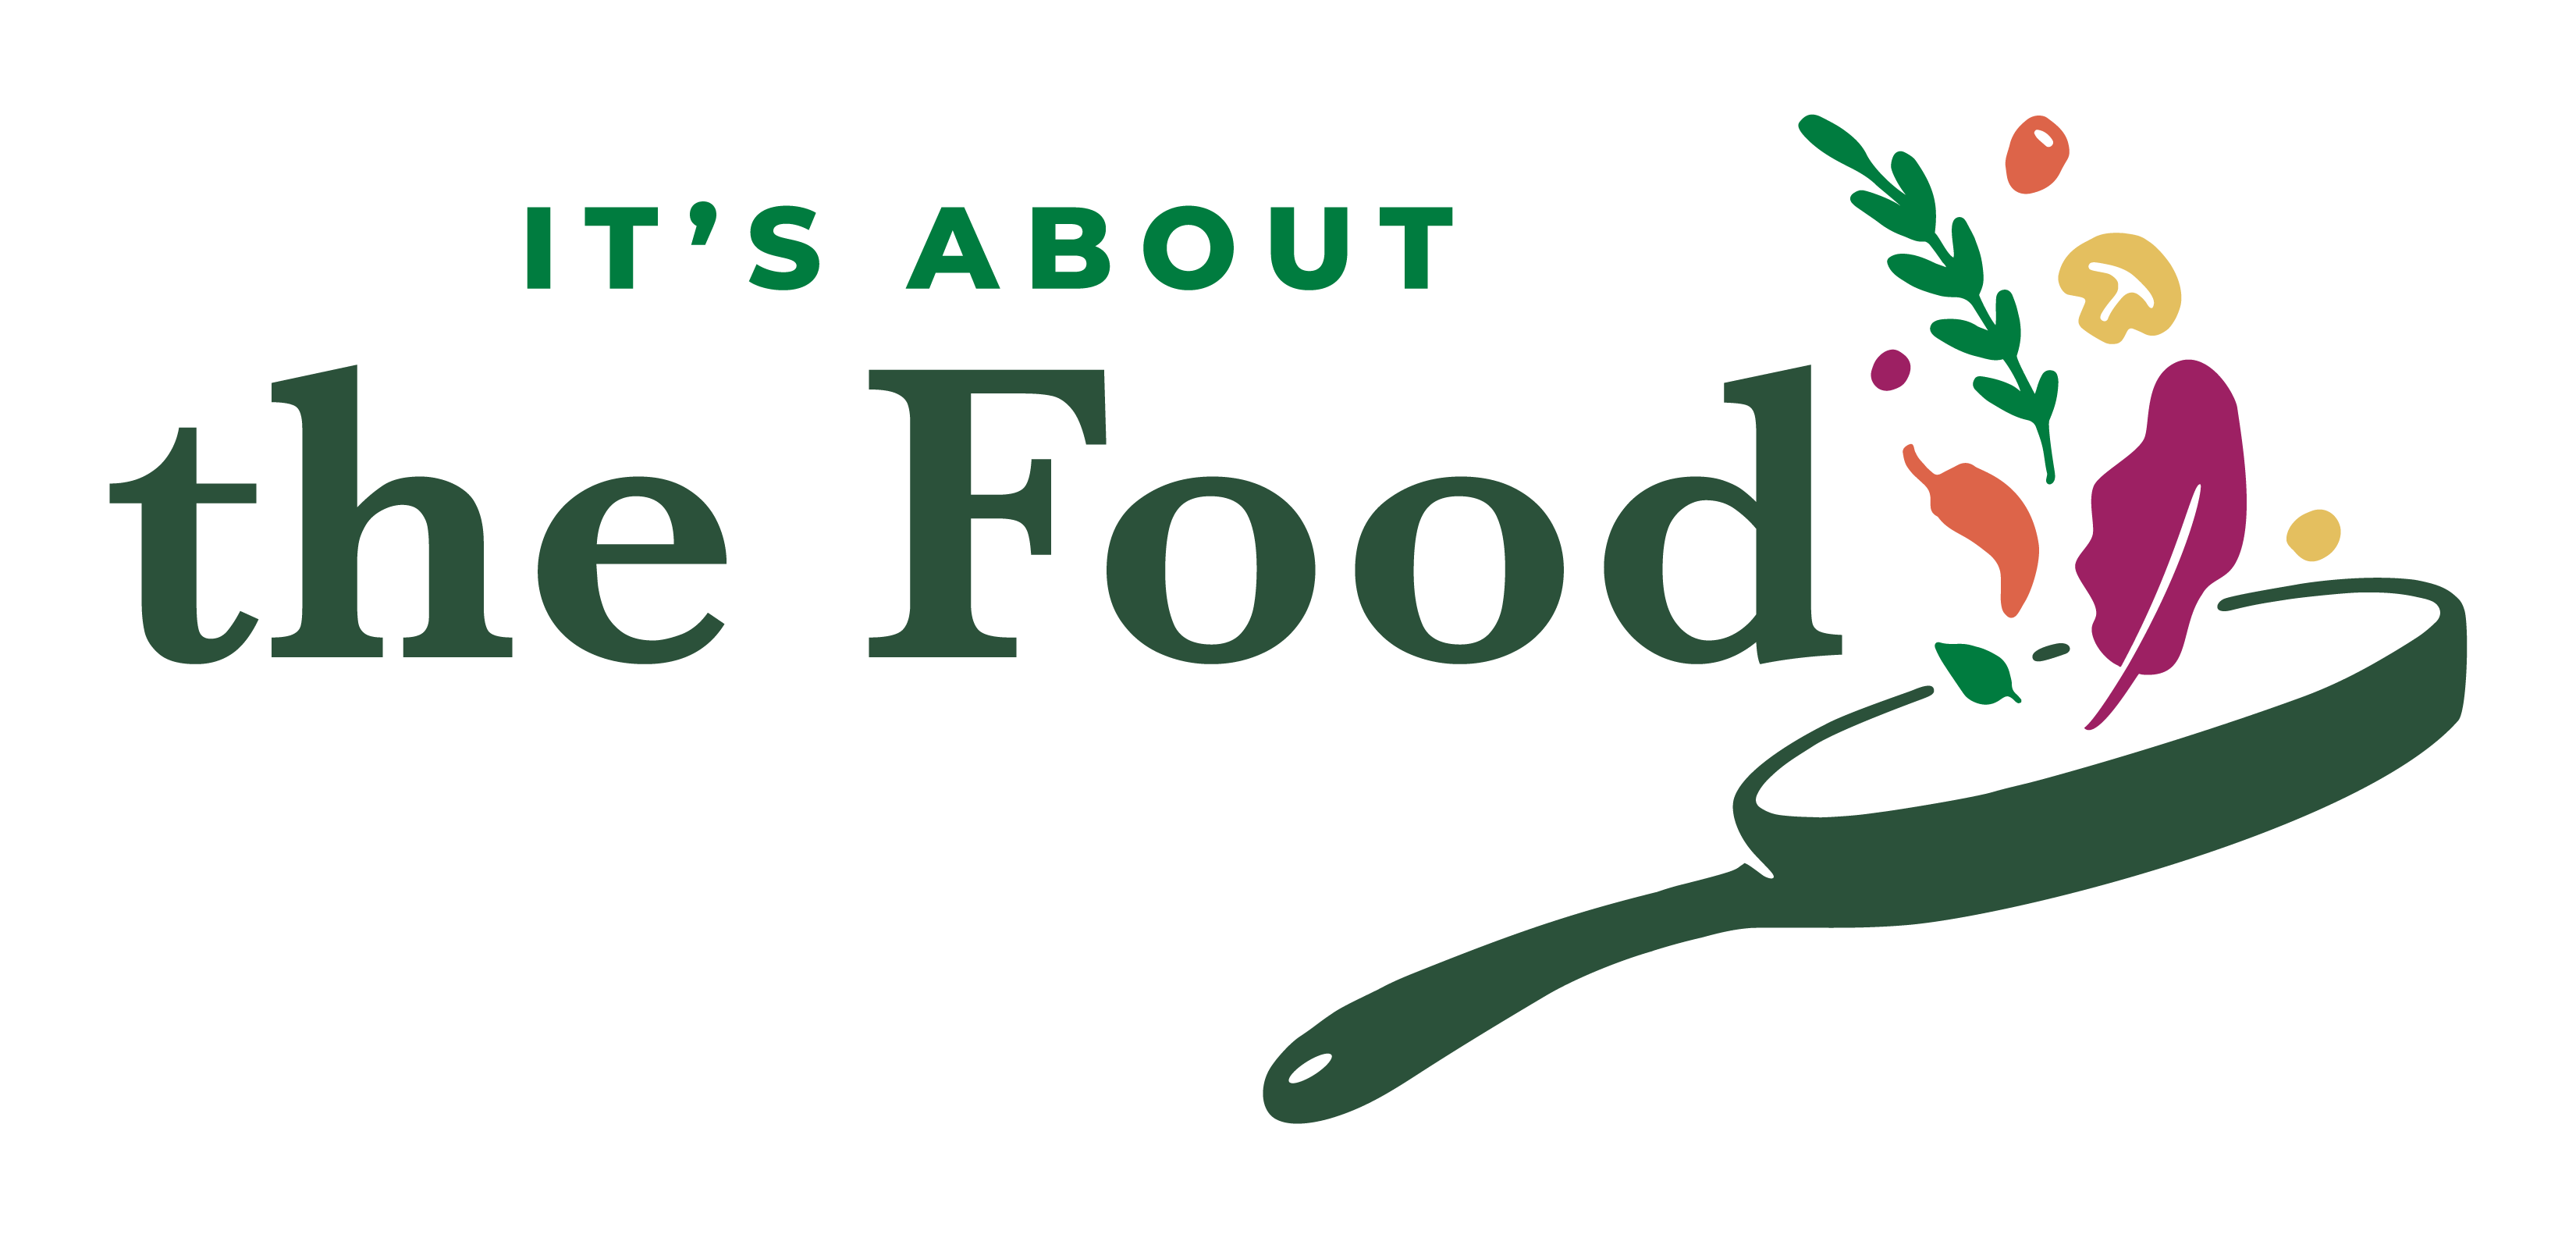 About the Food logo